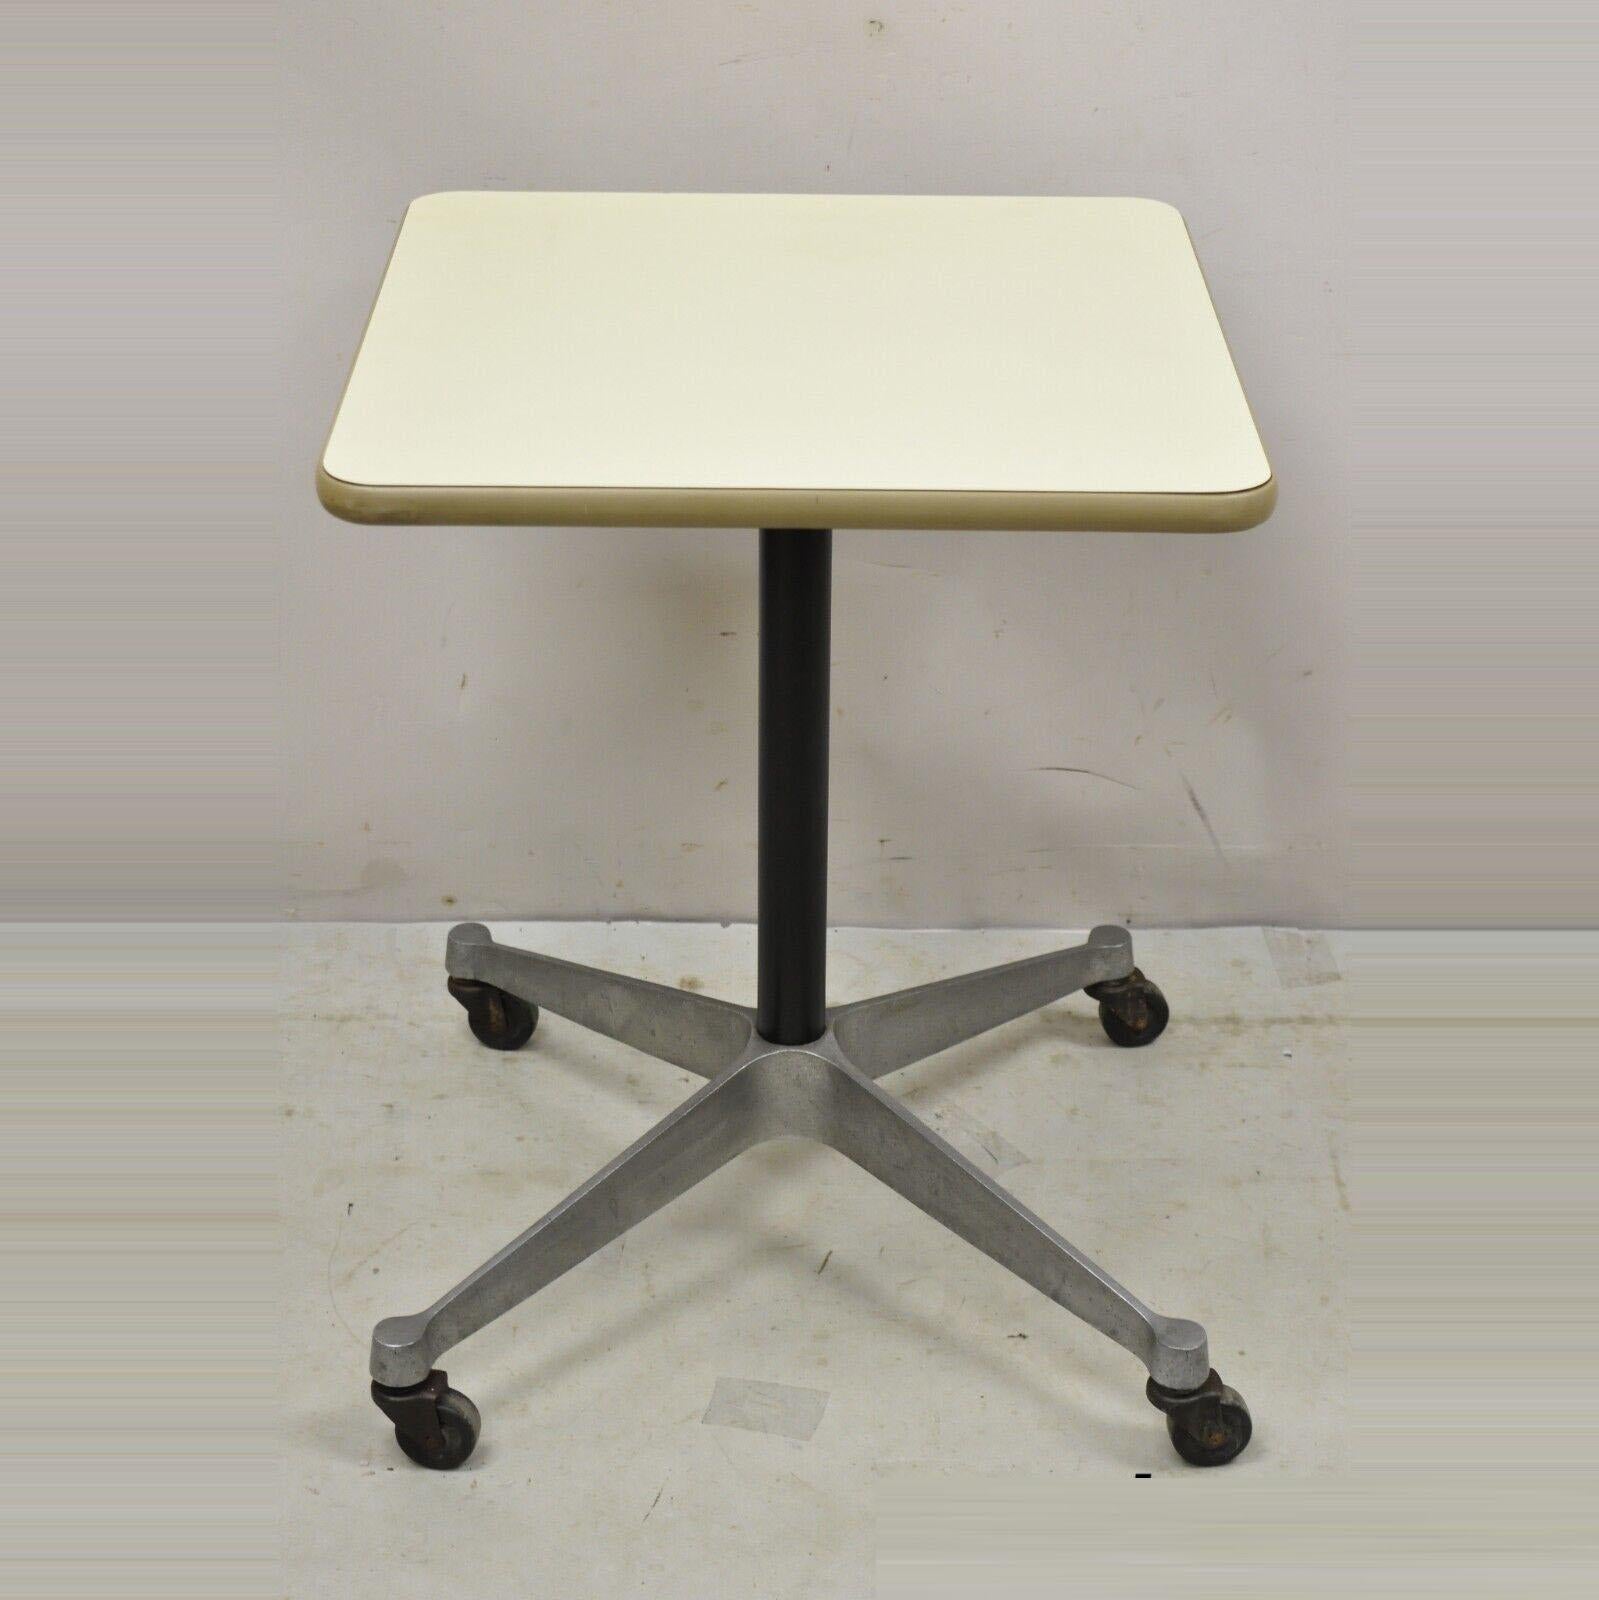 Vintage Eames Herman Miller Rolling Contract Side Table Mid-Century Modern. Item features off white laminate top, cast aluminum base, rolling wheels, original label, quality American craftsmanship, great style and form. Circa Mid to Late 20th